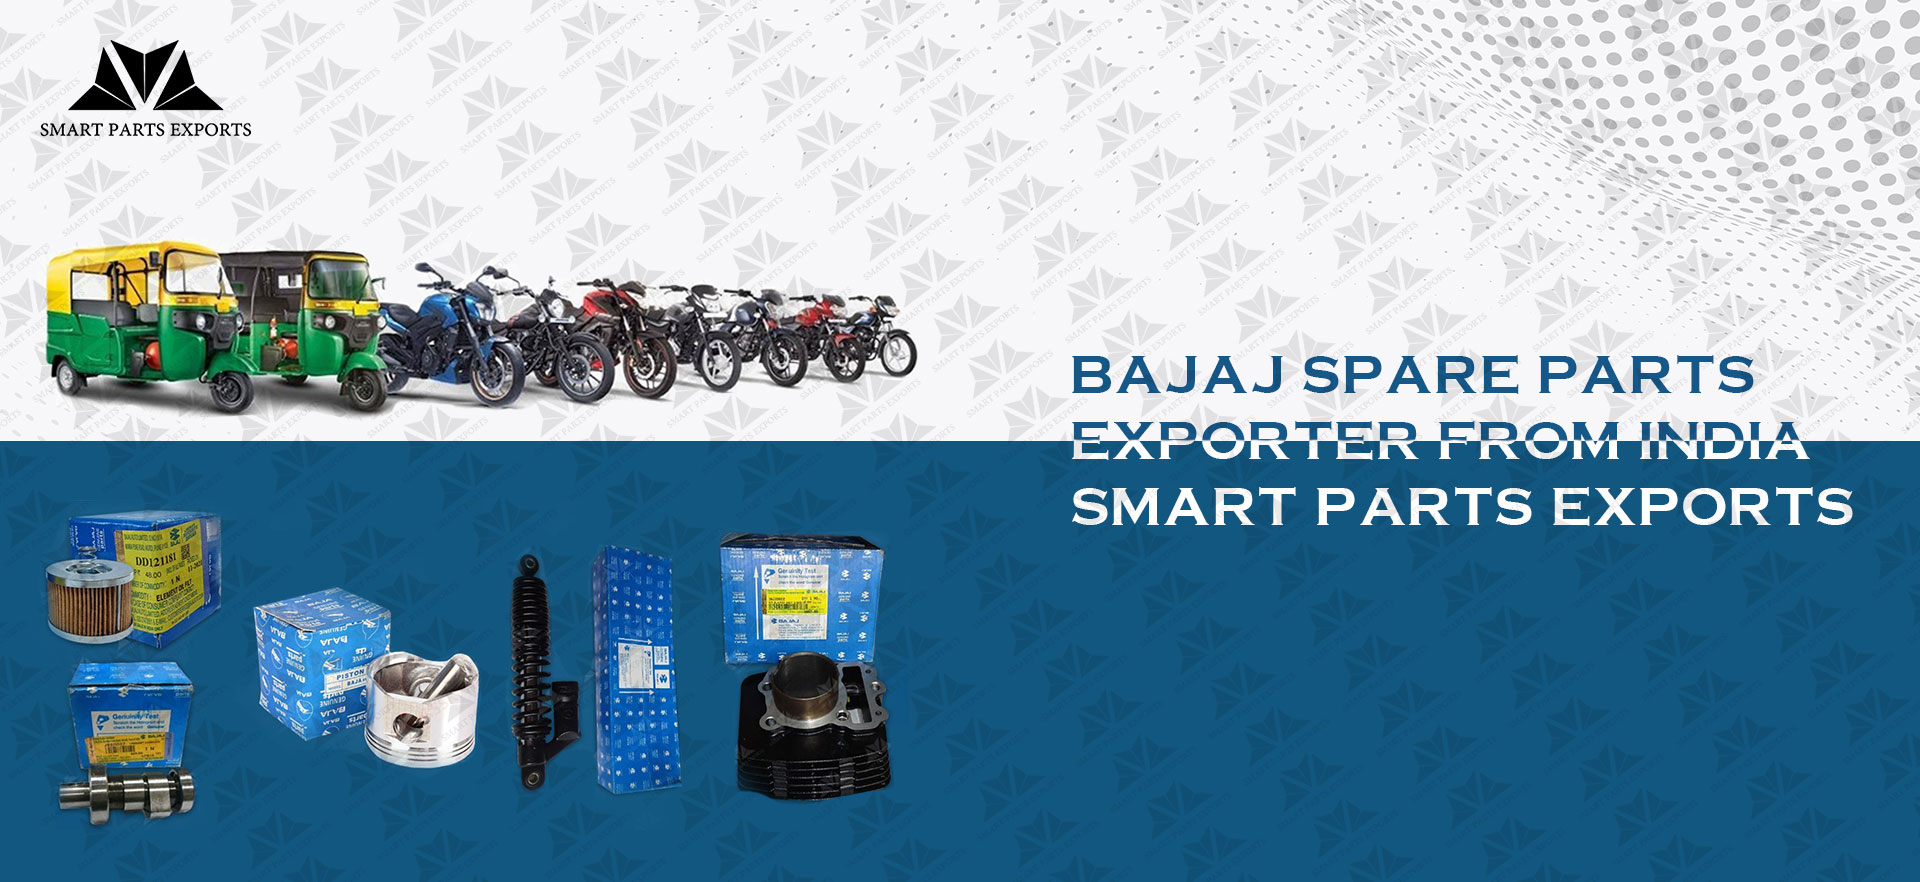 Bajaj Spare Parts Exporter from India | Smart Parts Exports